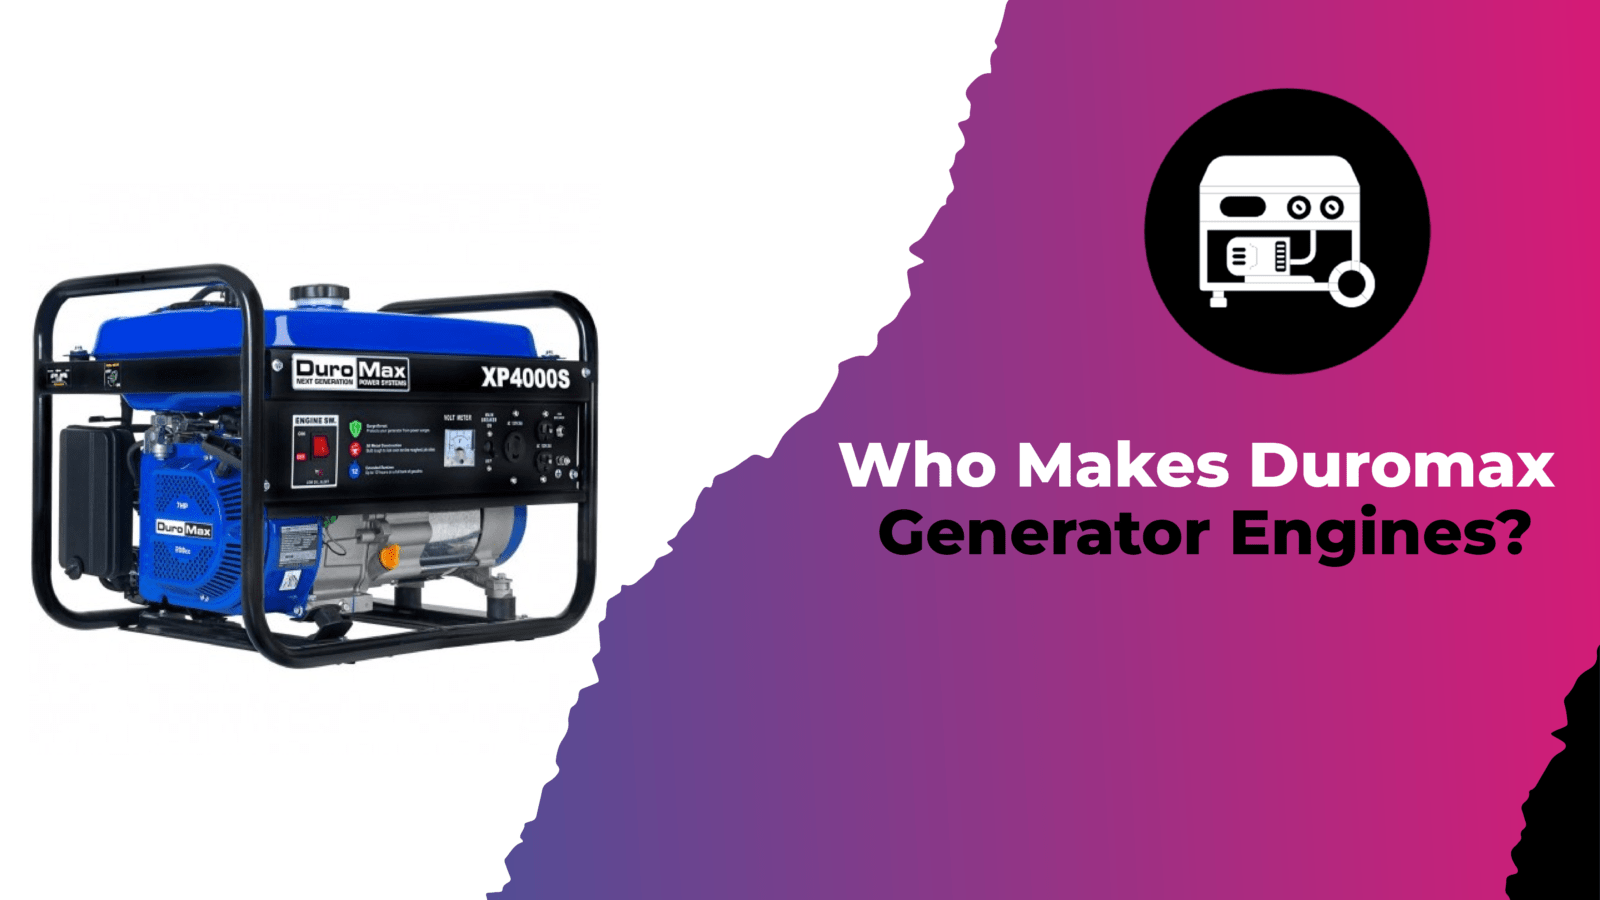 Who Makes Duromax Generator Engines